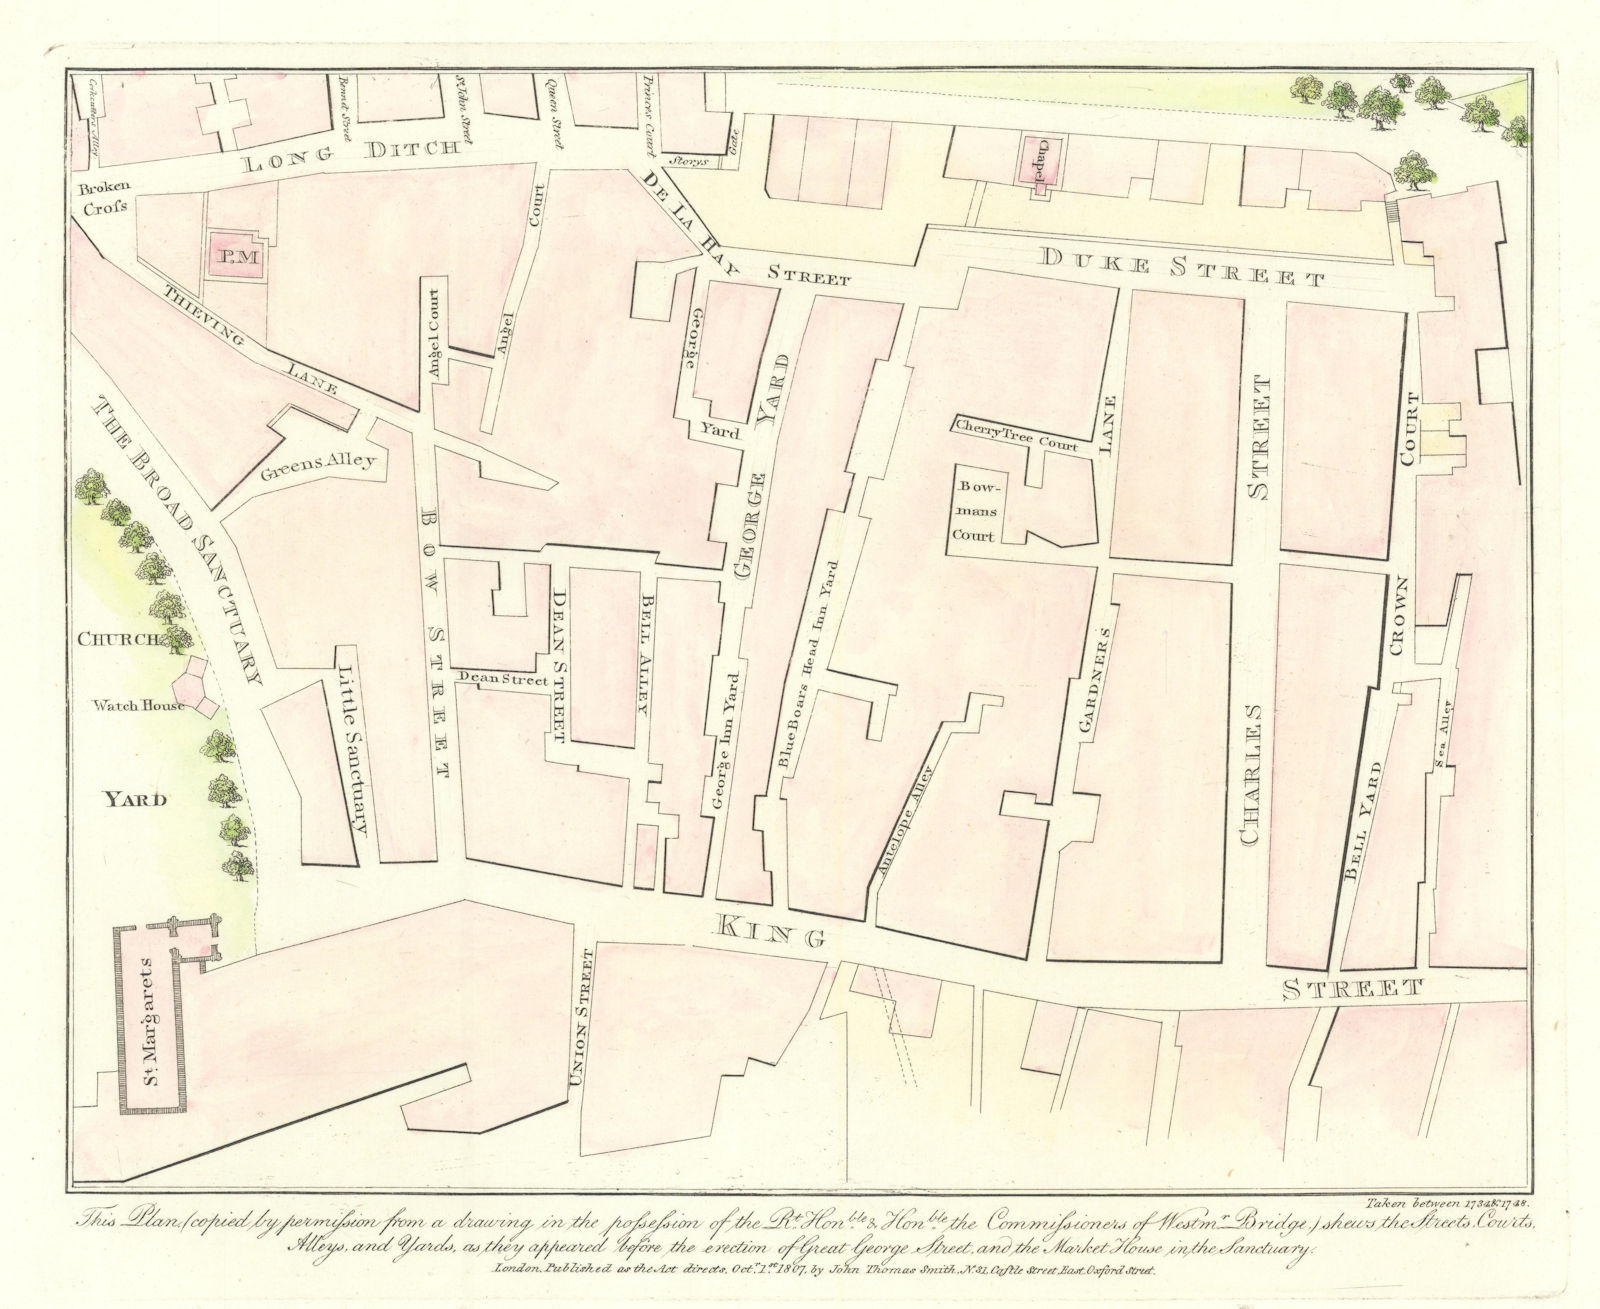 Plan of Westminster in 1734 before Parliament Street. J.T. SMITH 1807 old map